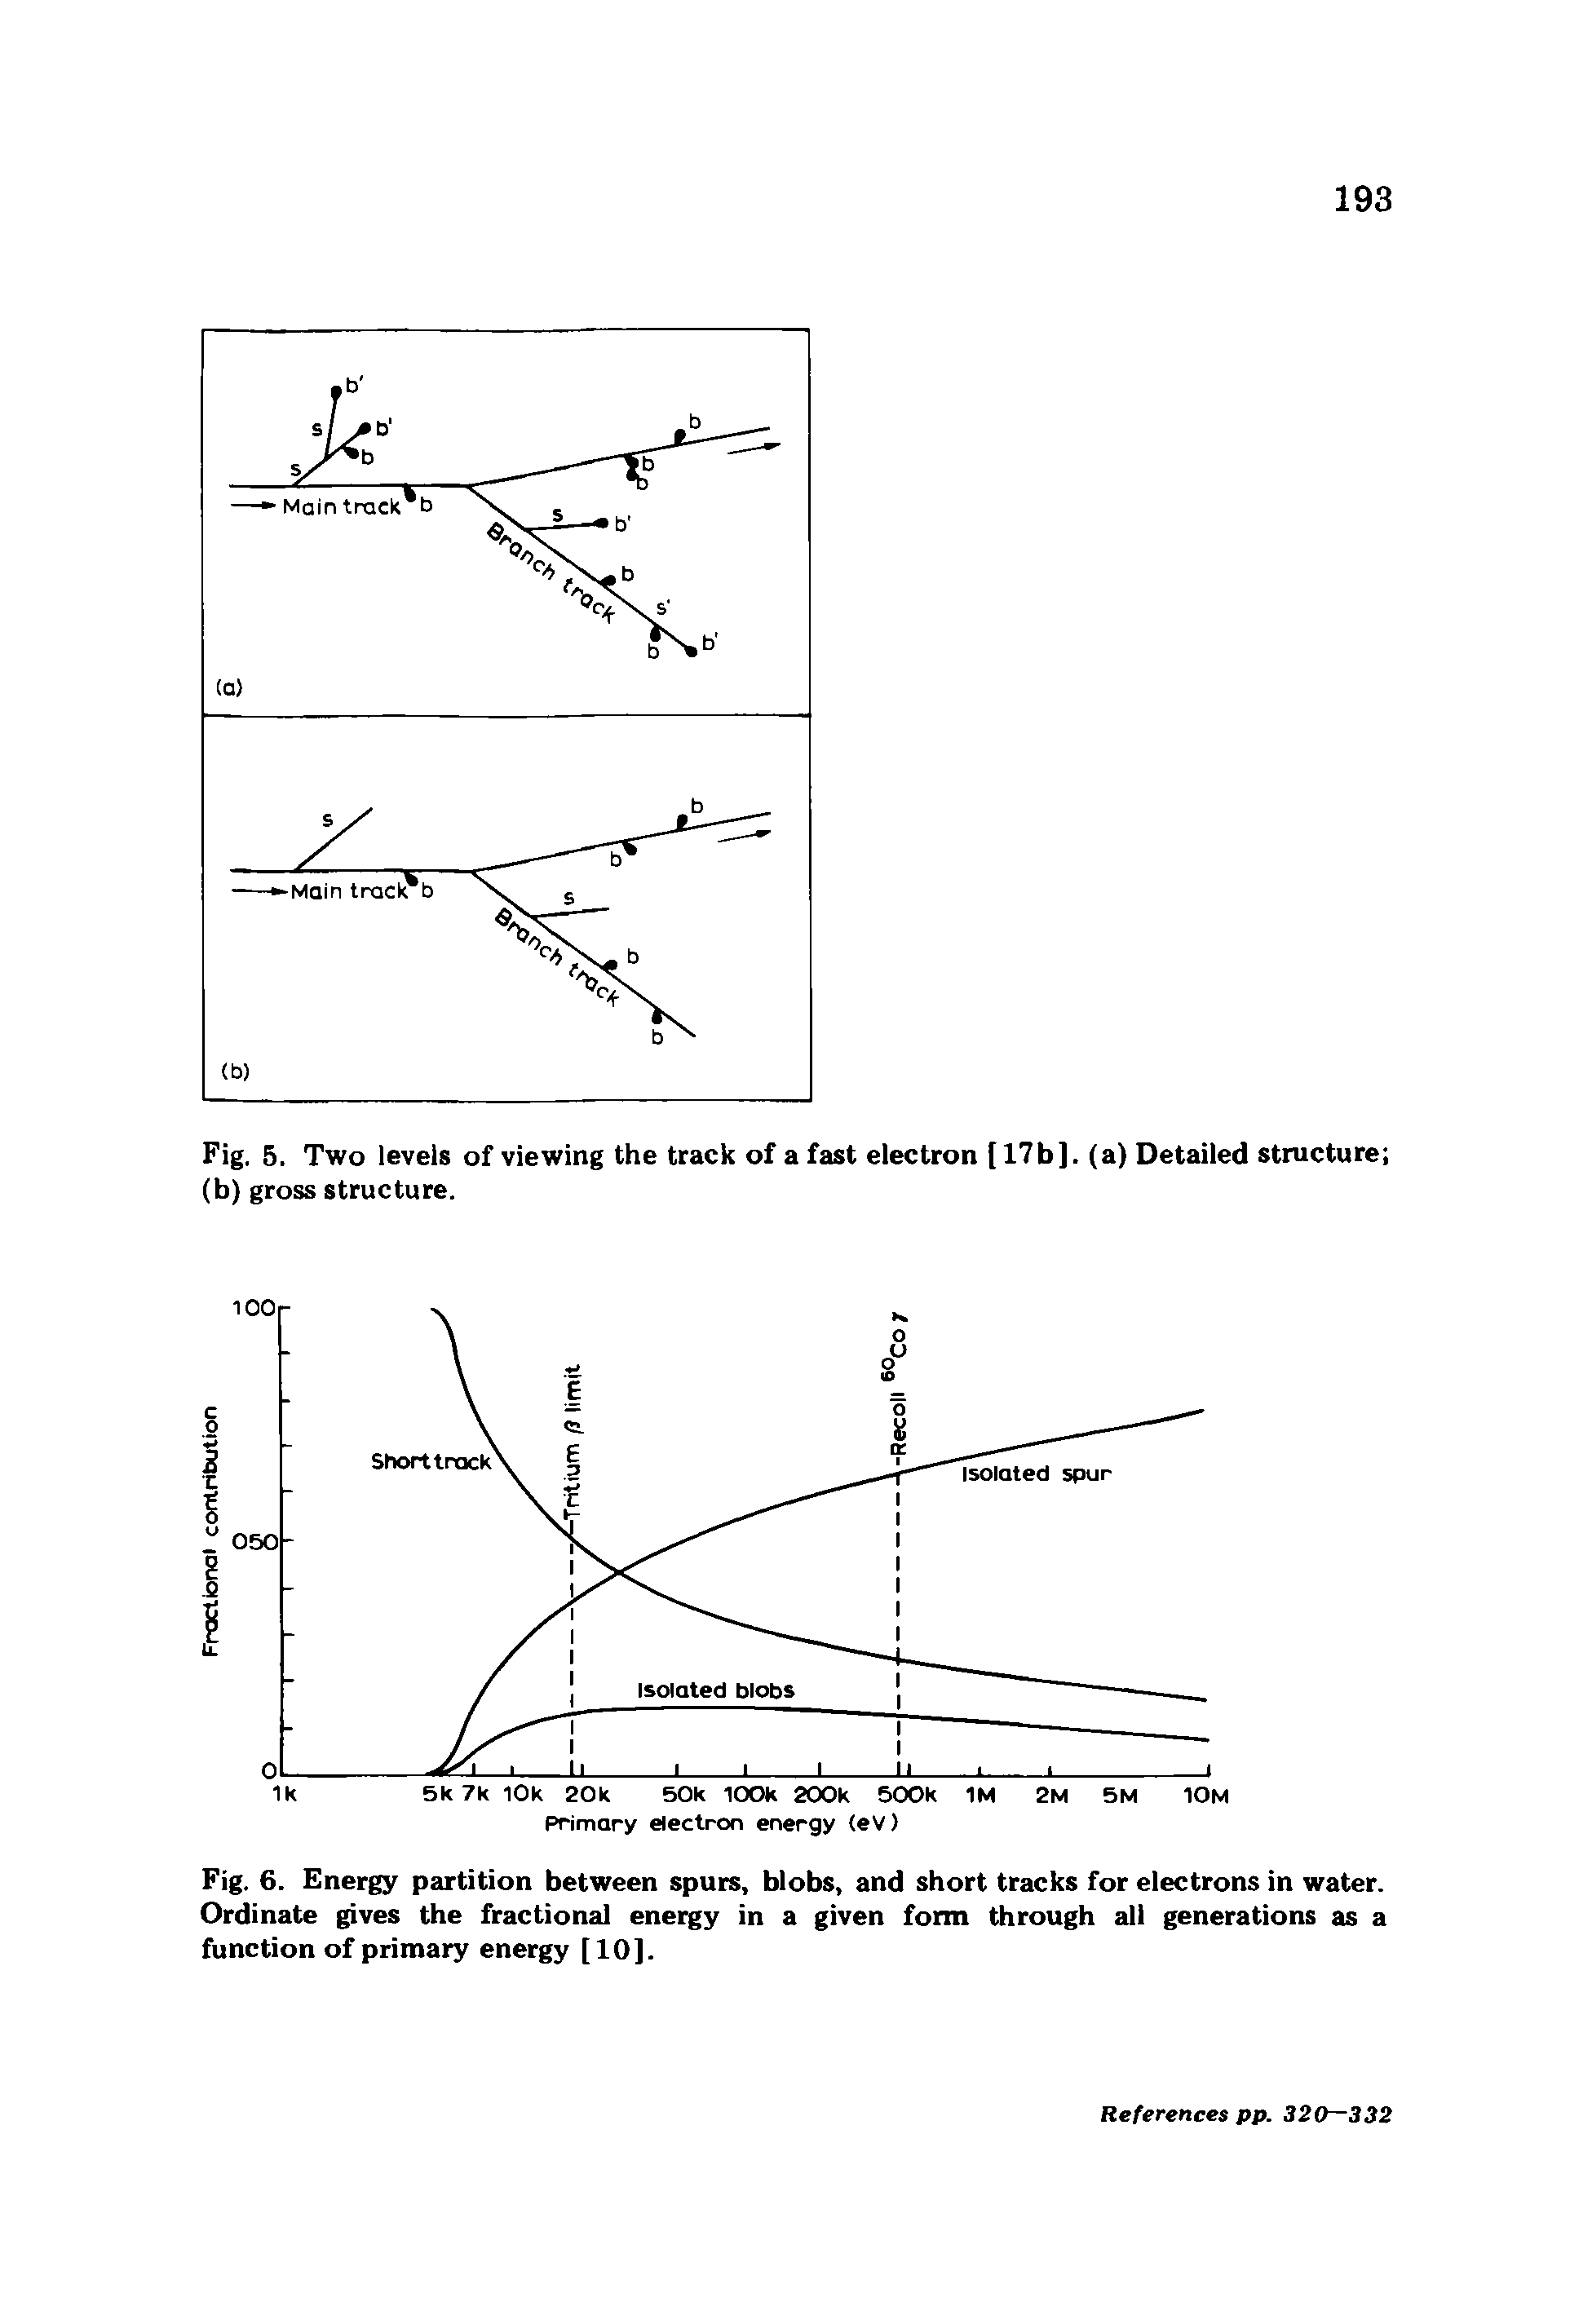 Fig. 6. Energy partition between spurs, blobs, and short tracks for electrons in water. Ordinate gives the fractional energy in a given form through all generations as a function of primary energy [10].